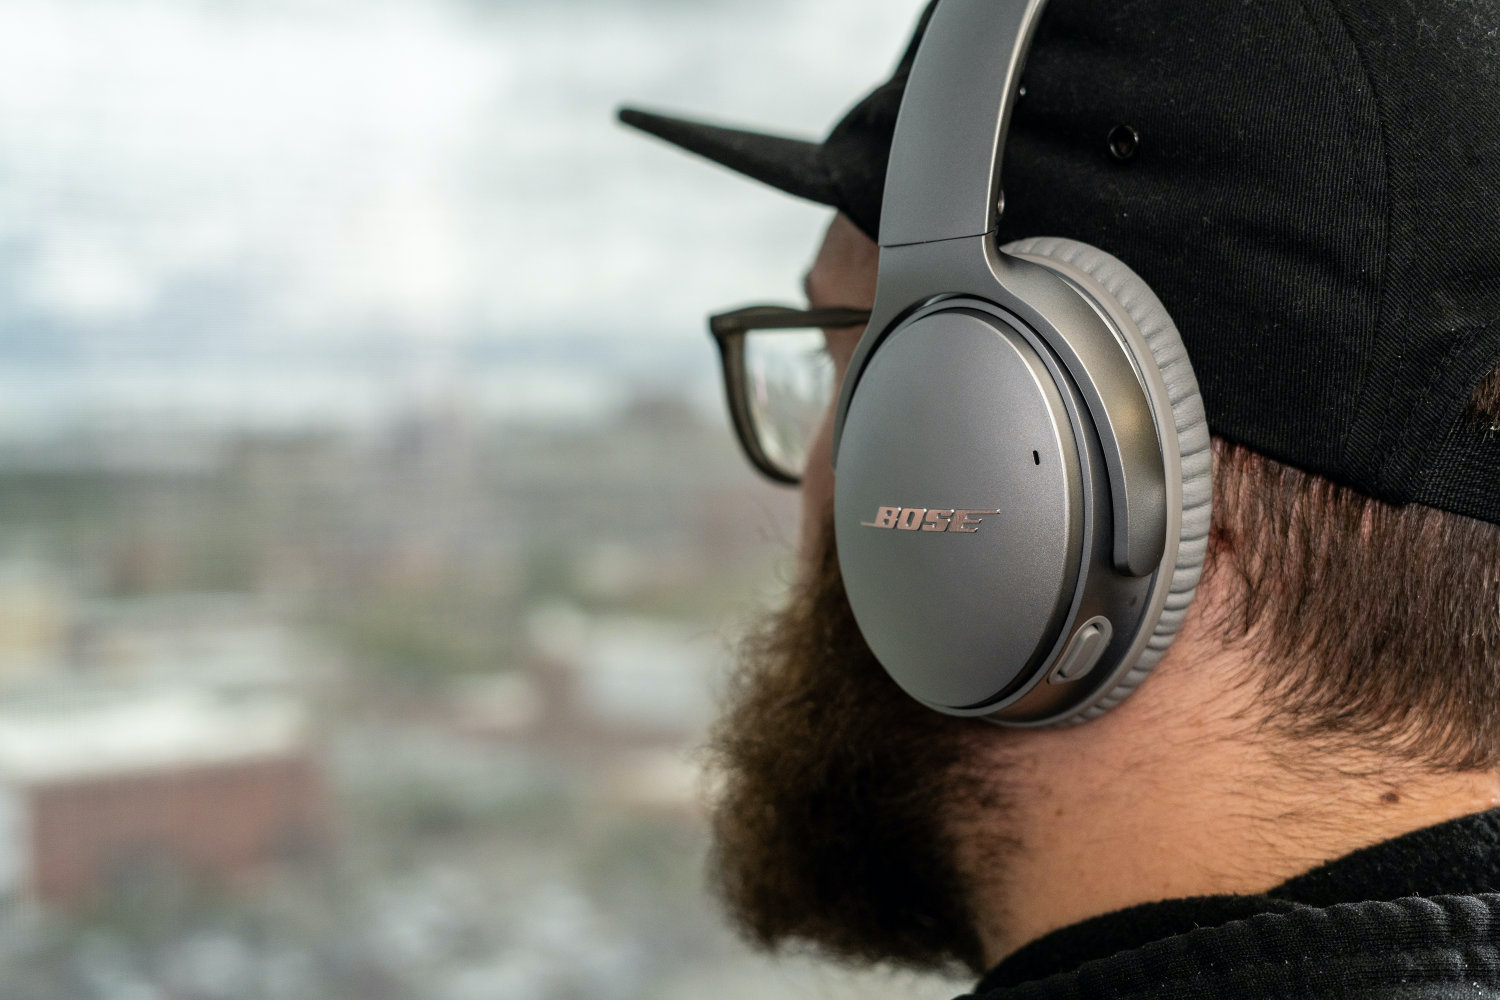 Are the AirPods Pro as good as Bose QuietComfort 35 II?